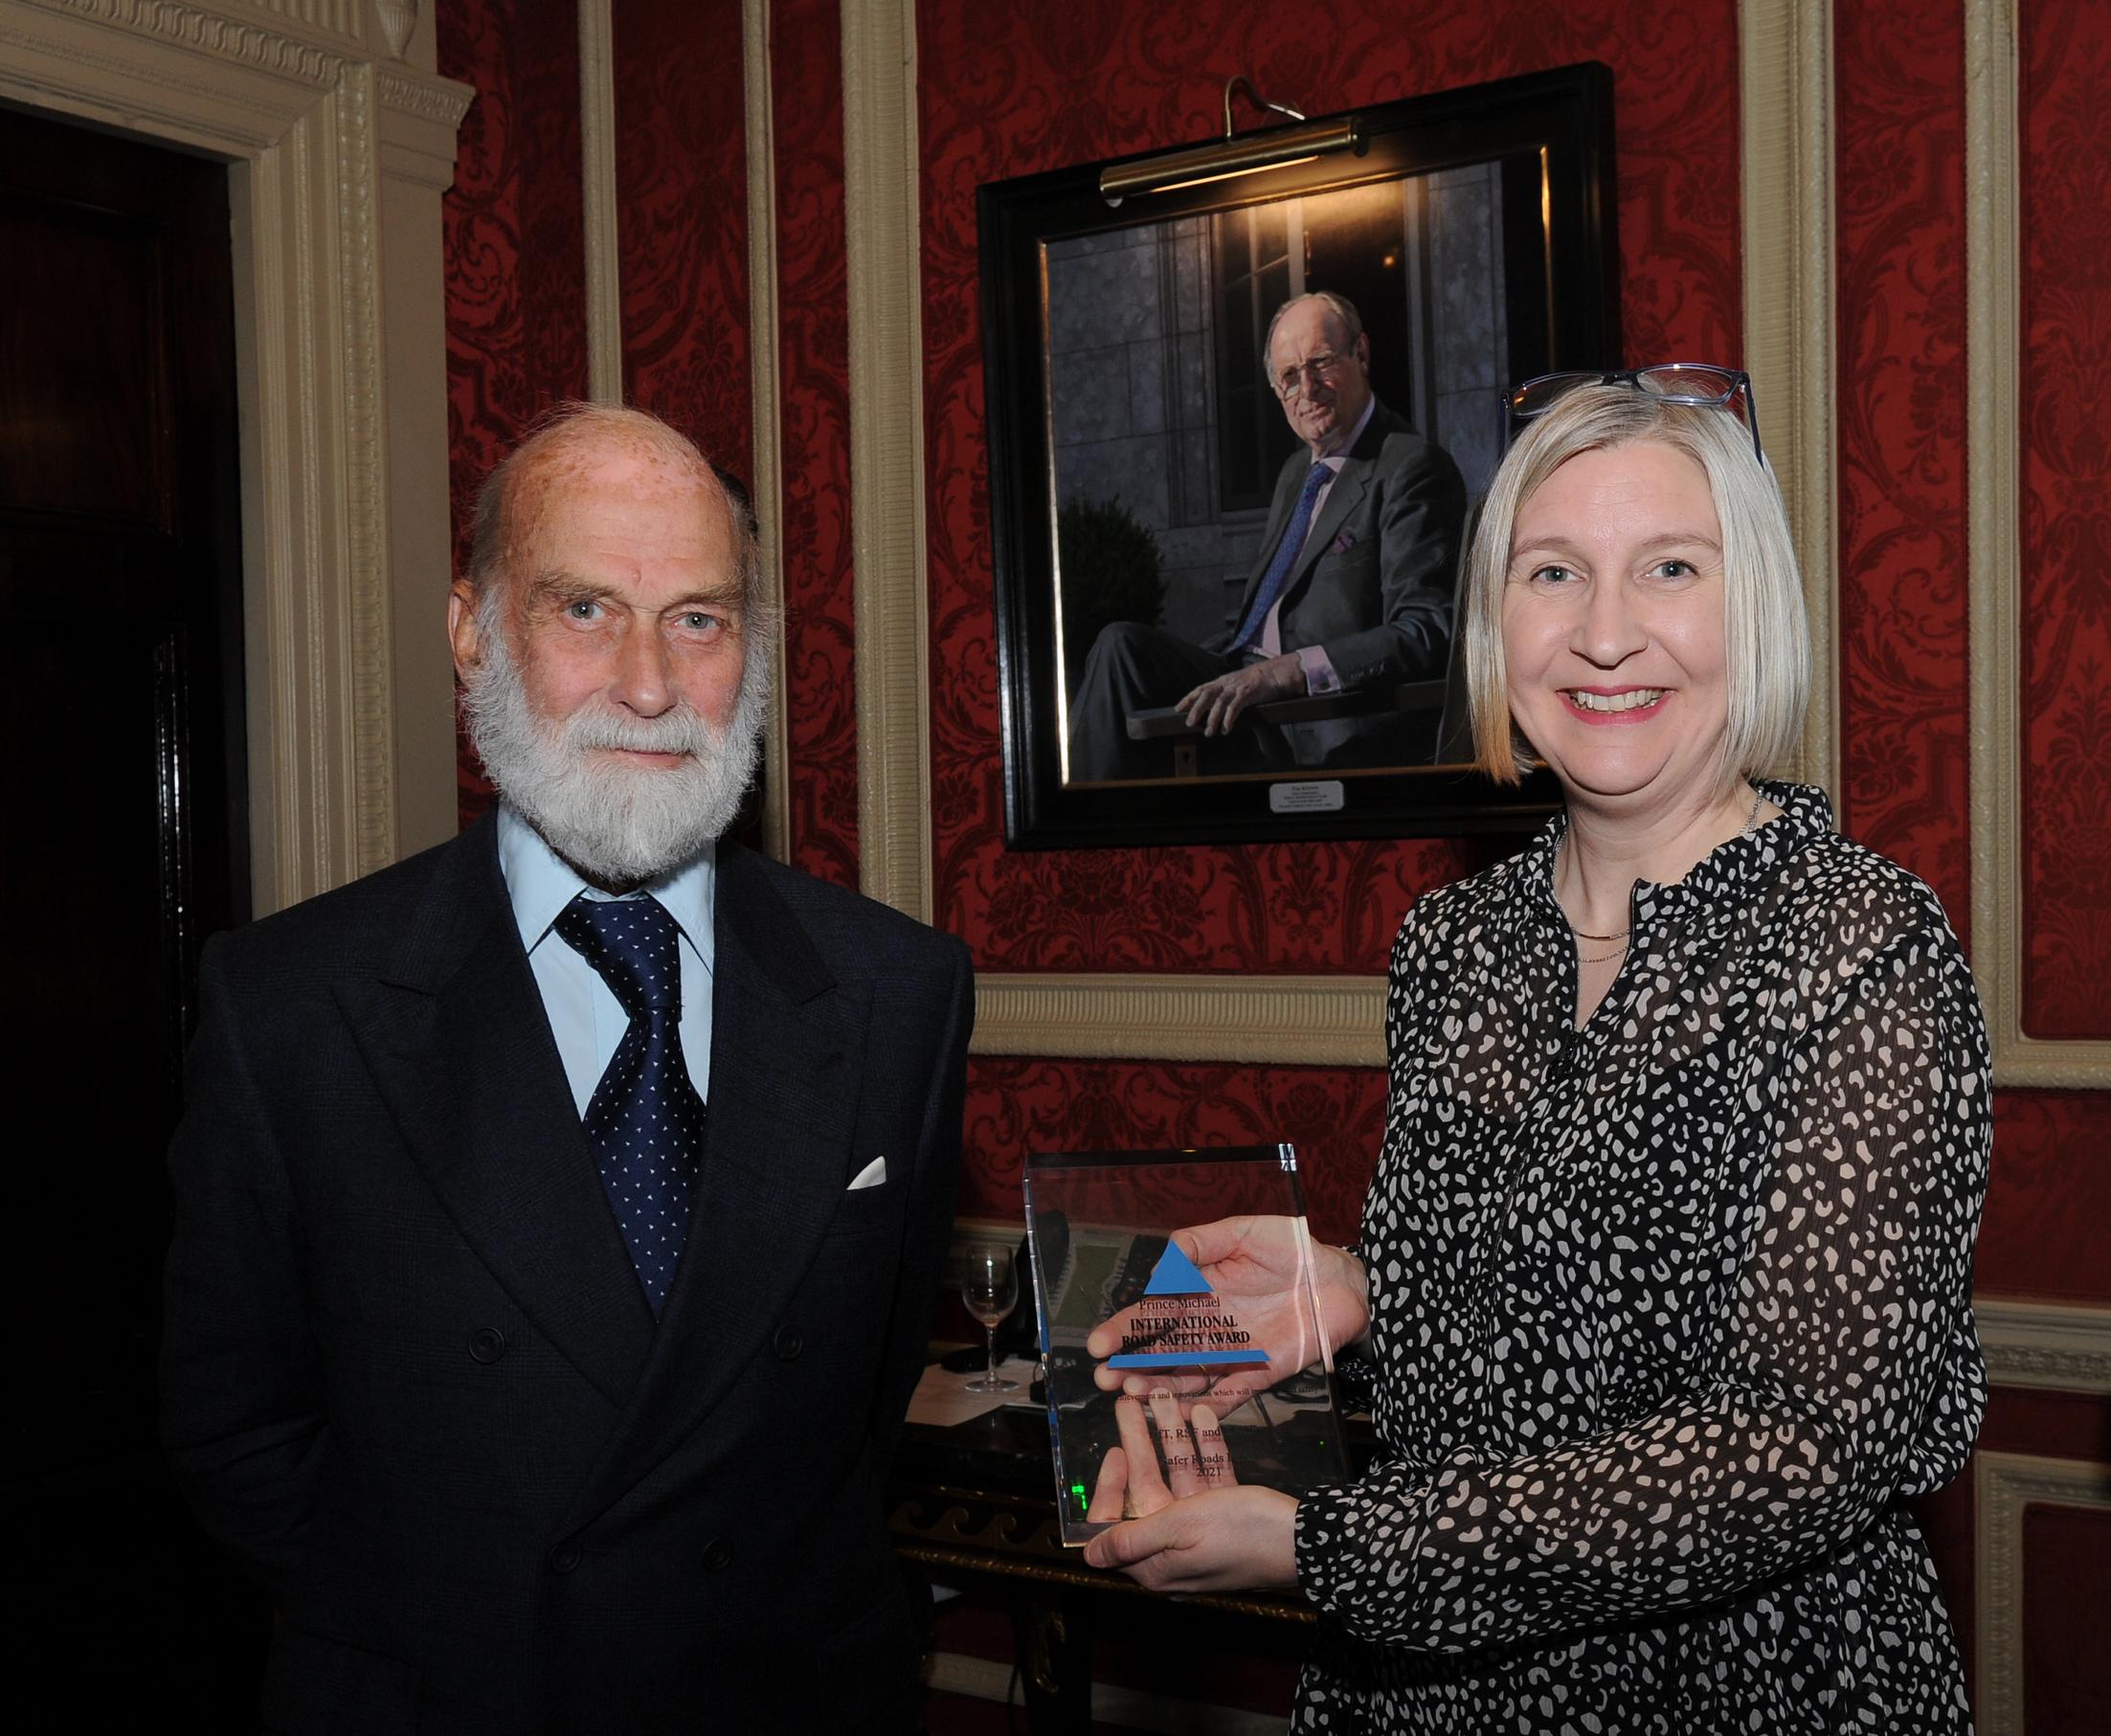 Prince Michael of Kent presents the award to DfT’s Emma Ward